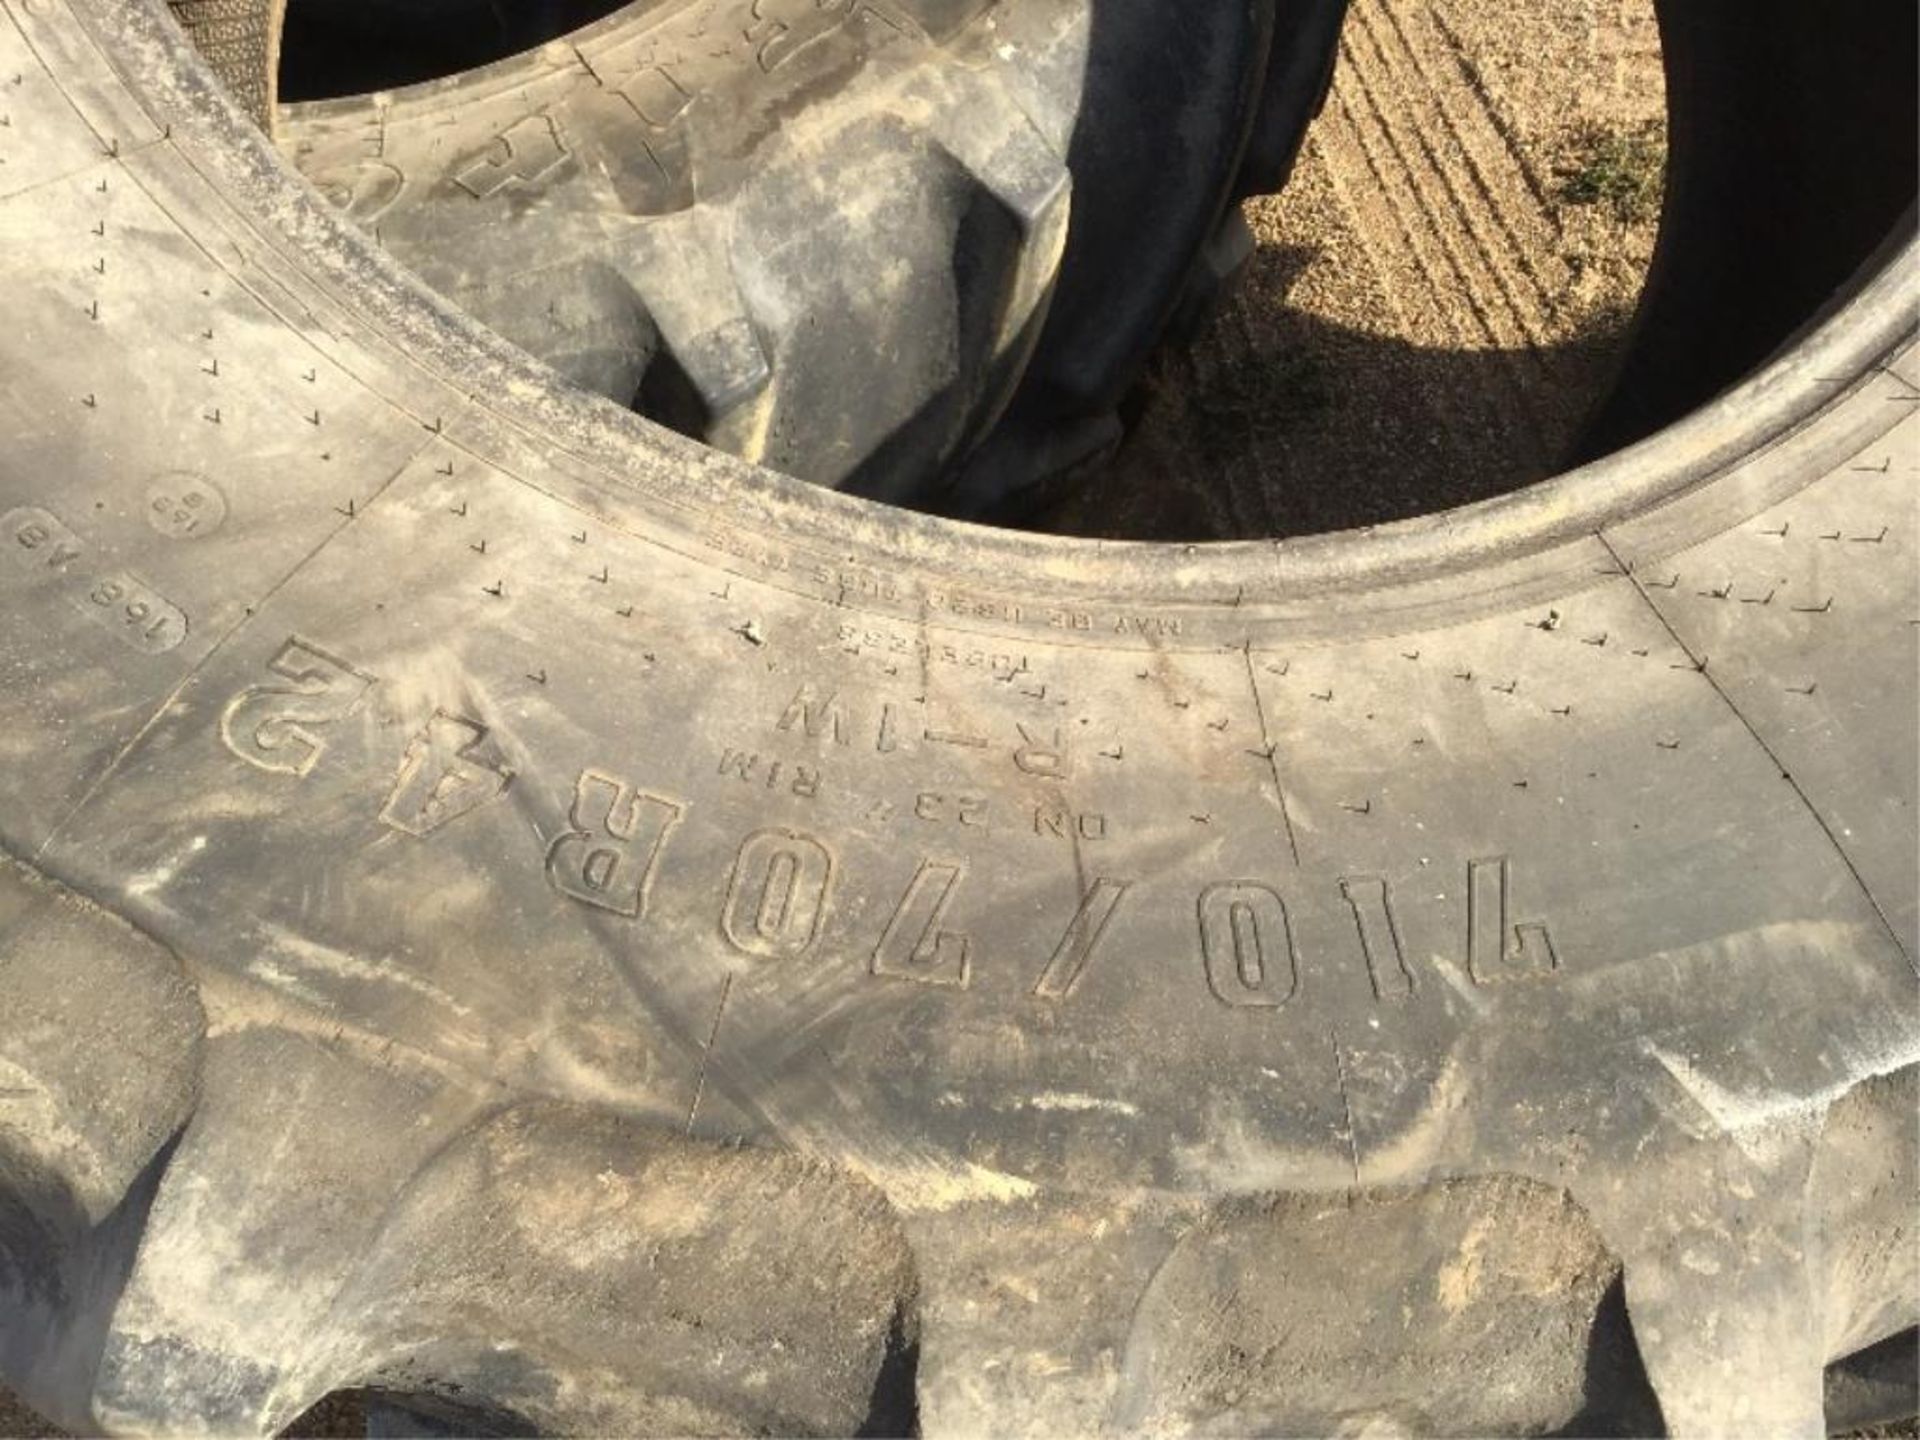 Set of 3 710/70R42 Tractor Tires - Image 2 of 2